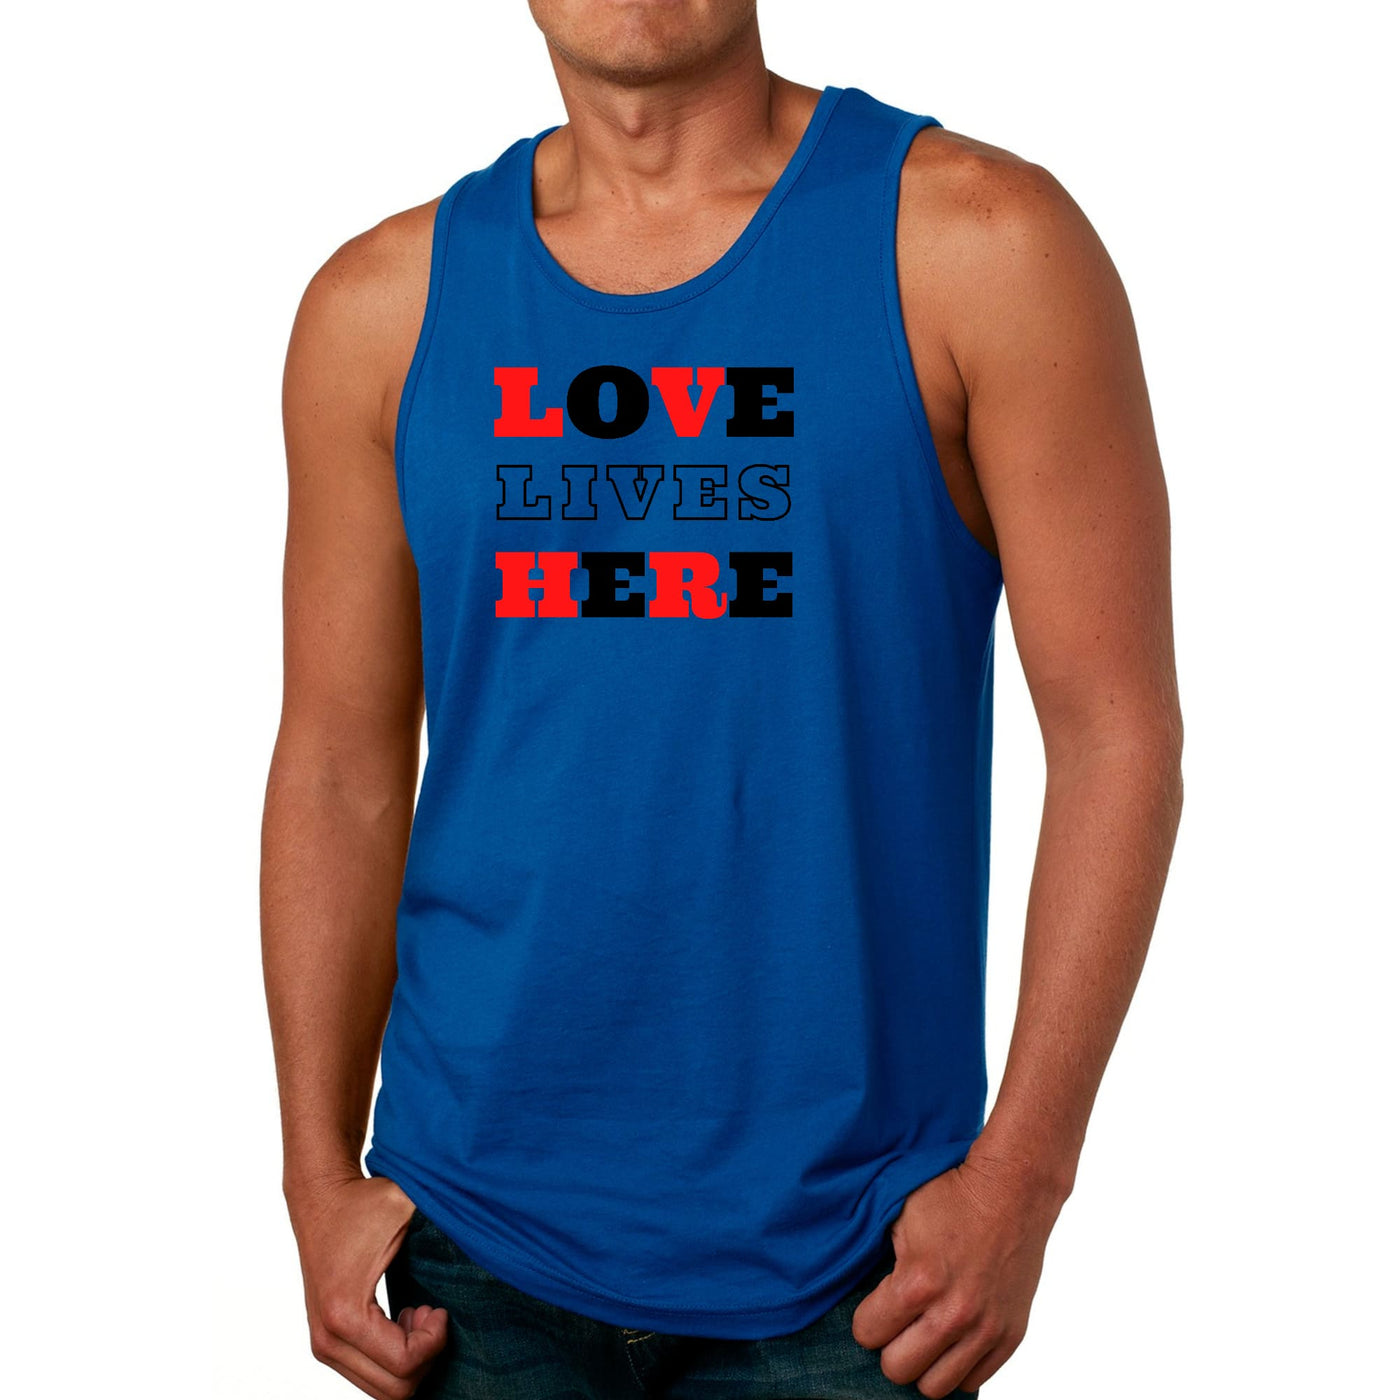 Mens Tank Top Fitness T - shirt Love Lives Here Christian Red Black - Tops